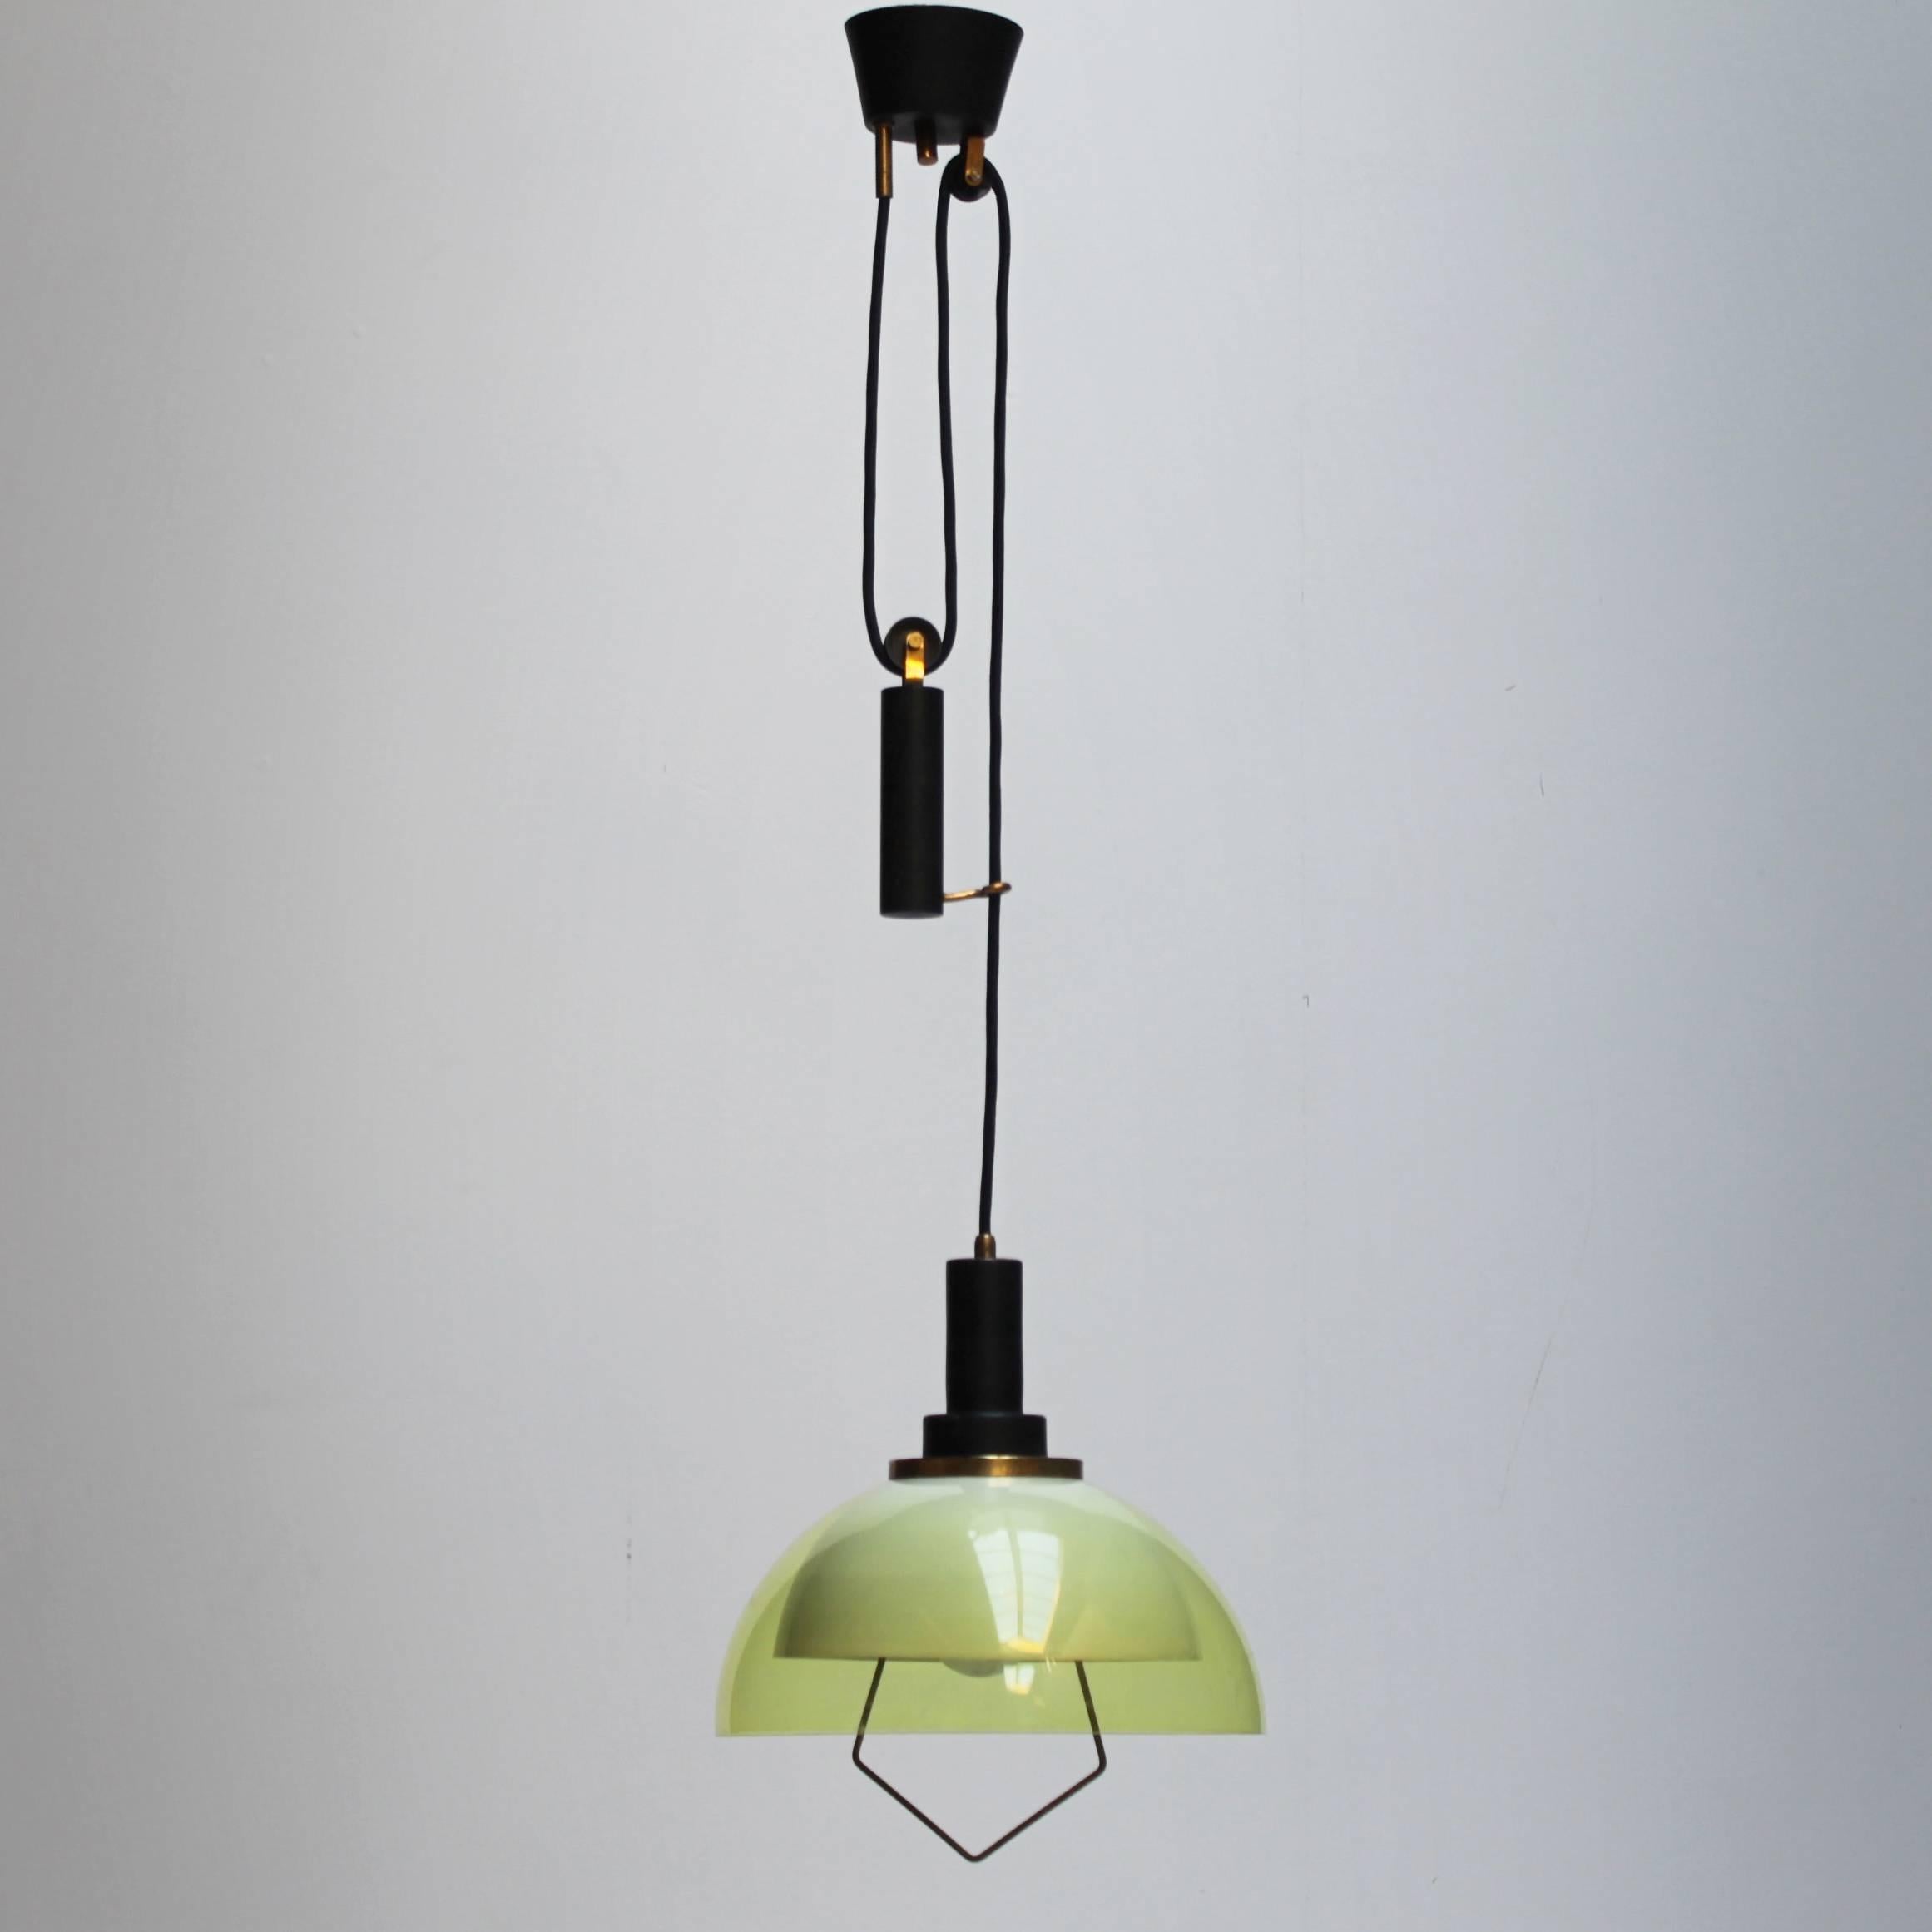 Pendant by Stilux Italy from the 1950s. This pendant, which can be adjusted in height with a counterweight, shows a striking combination of brass, black enameled metal and green/yellow plastics. Inside a white metal shade and outside an extra